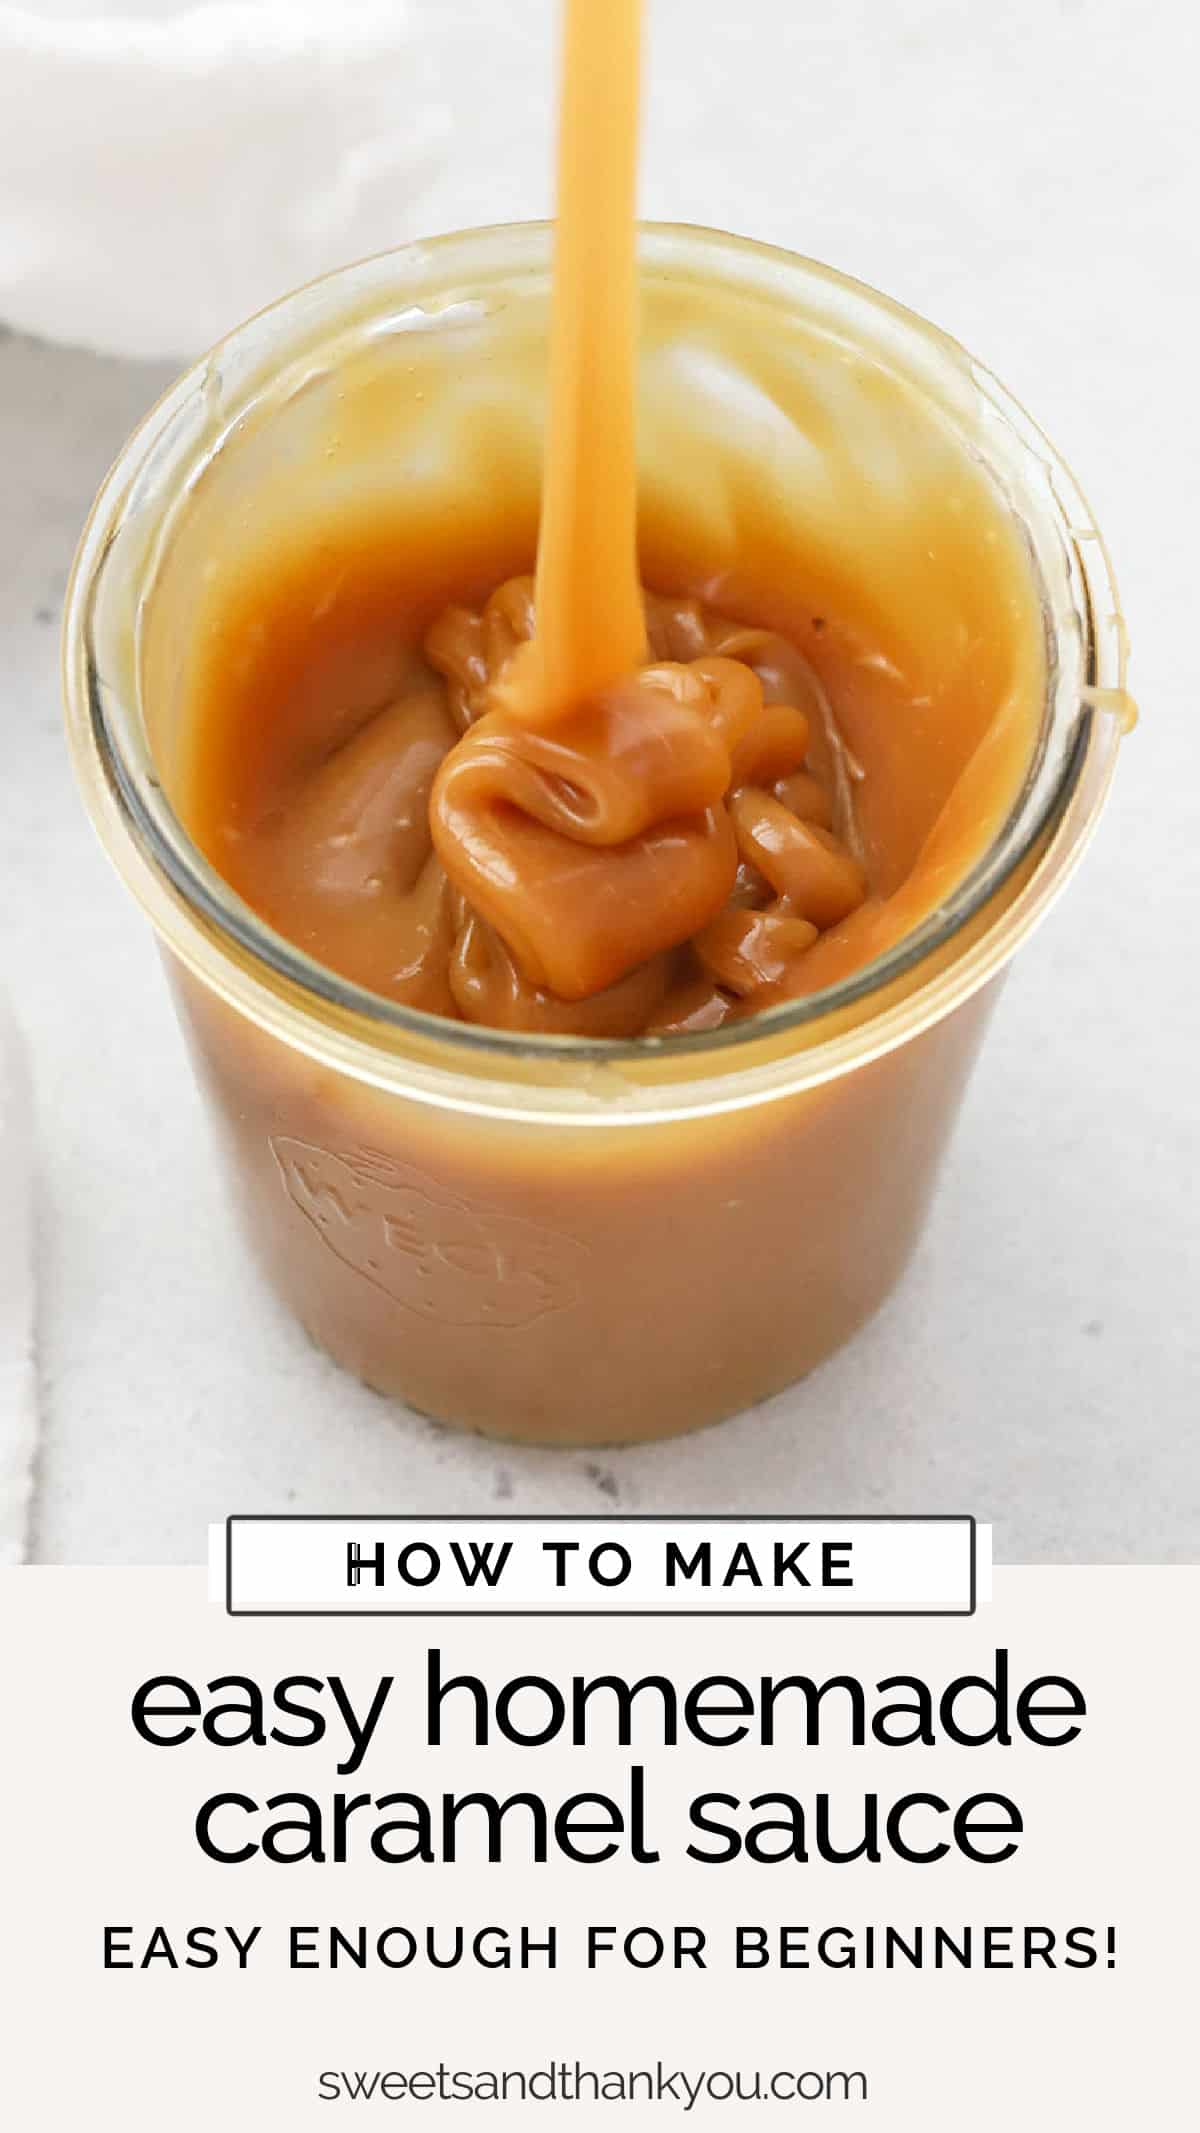 How To Make Caramel Sauce - Our easy caramel sauce recipe is great for beginners and pros alike. You'll love it on ice cream, cake, brownies and more! // easy caramel sauce recipe // easy salted caramel sauce recipe // caramel sauce for beginners // how to keep caramel sauce from crystallizing / how to make caramel sauce, step by step / how to make caramel video / how to make caramel recipe / beginner caramel sauce / gluten free caramel sauce recipe